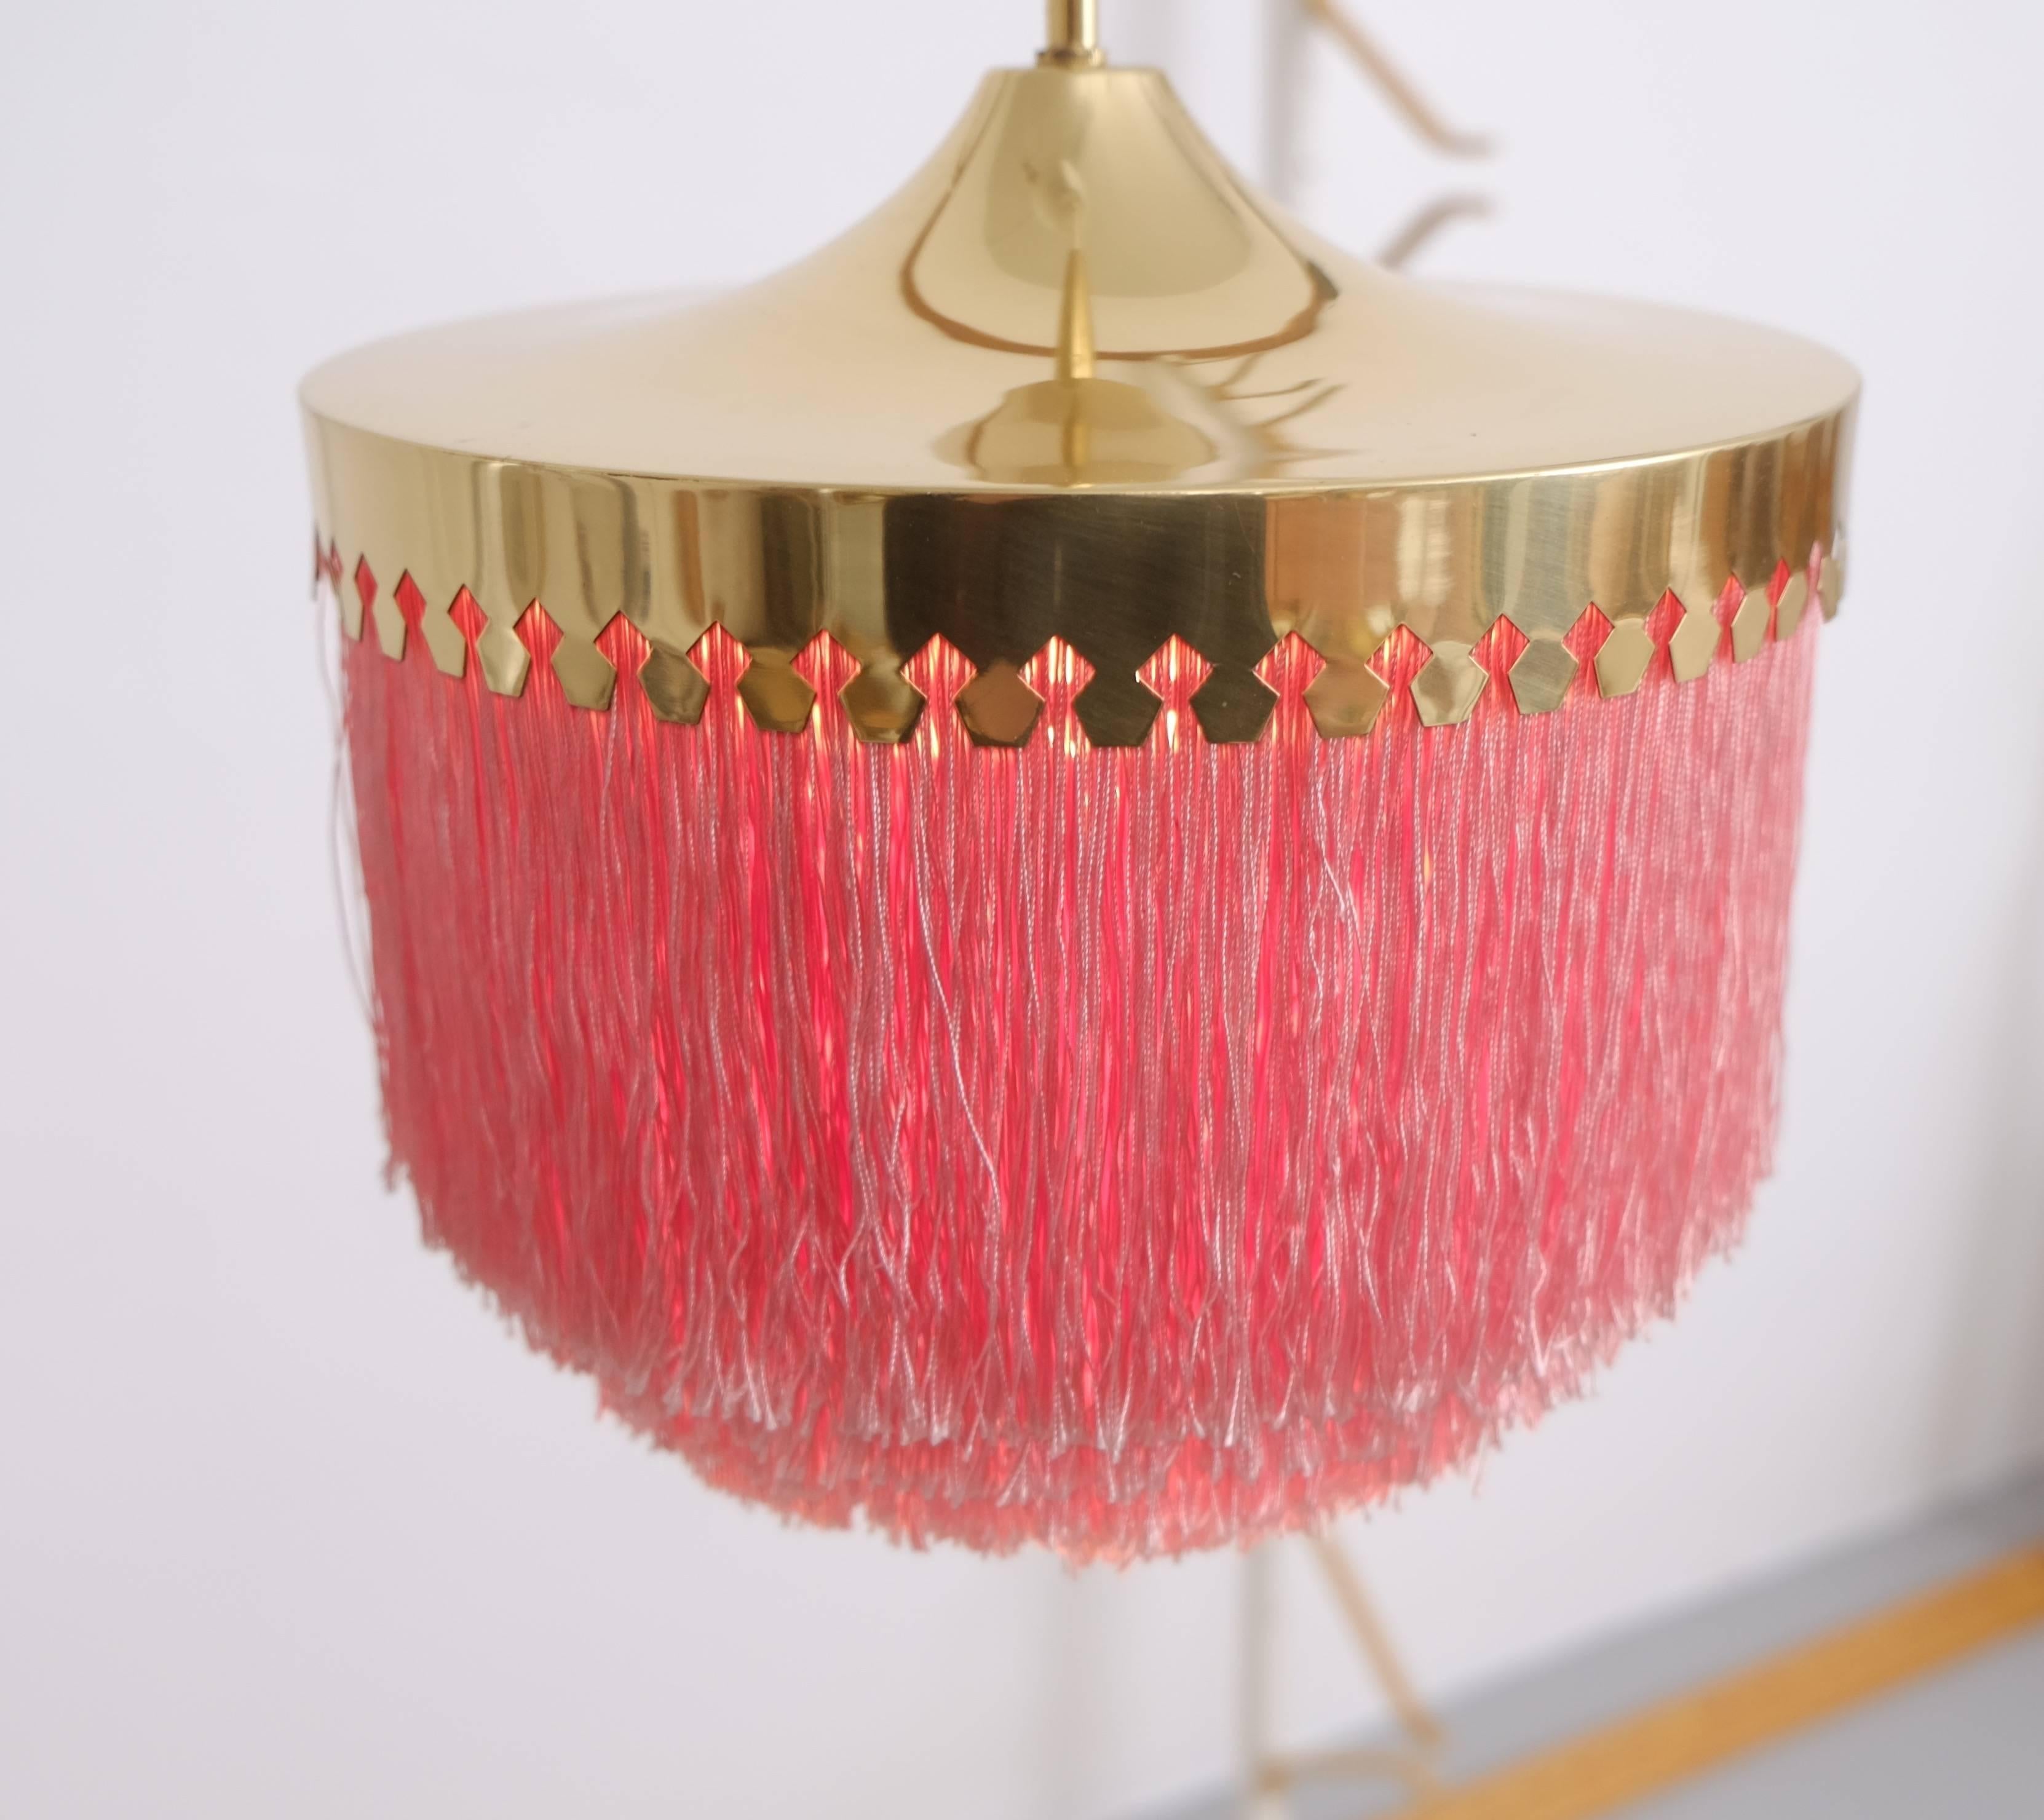 Pink silk fringes pendant light with brass frame.
Great original condition. Fitted with one E27 socket.
Measures: Height of the lamp only from bottom of fringes to top of brass crown approximately 36 cm, diameter: 28 cm, height 100 cm.